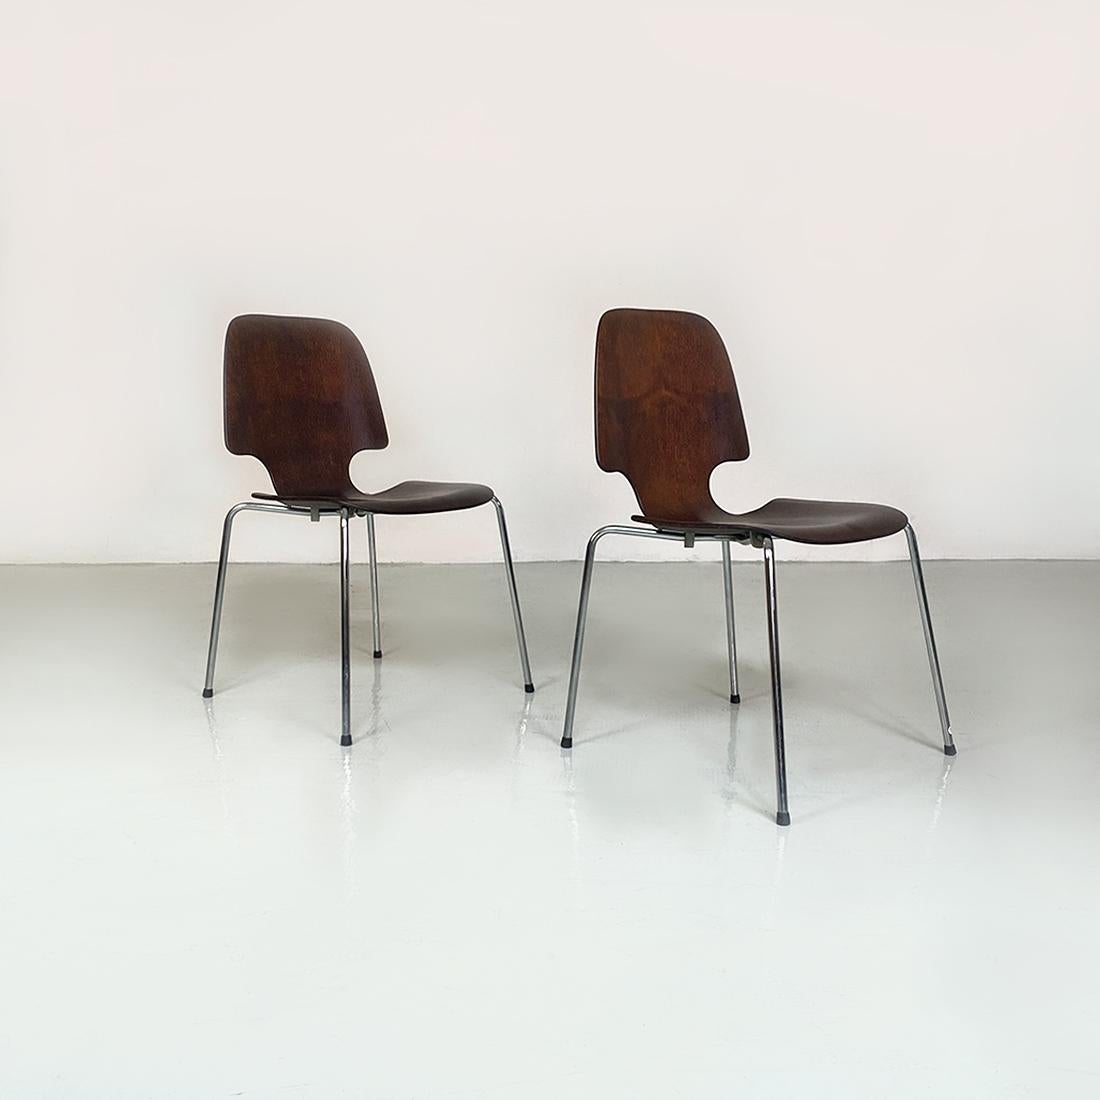 German Mid-Century Modern pair of dark wood single shell and chromed steel rods legs chairs, 1960s
Set of two German chairs, with single shell in dark wood, curved with a contoured shape and legs in chromed steel rod, with round metal detail in the